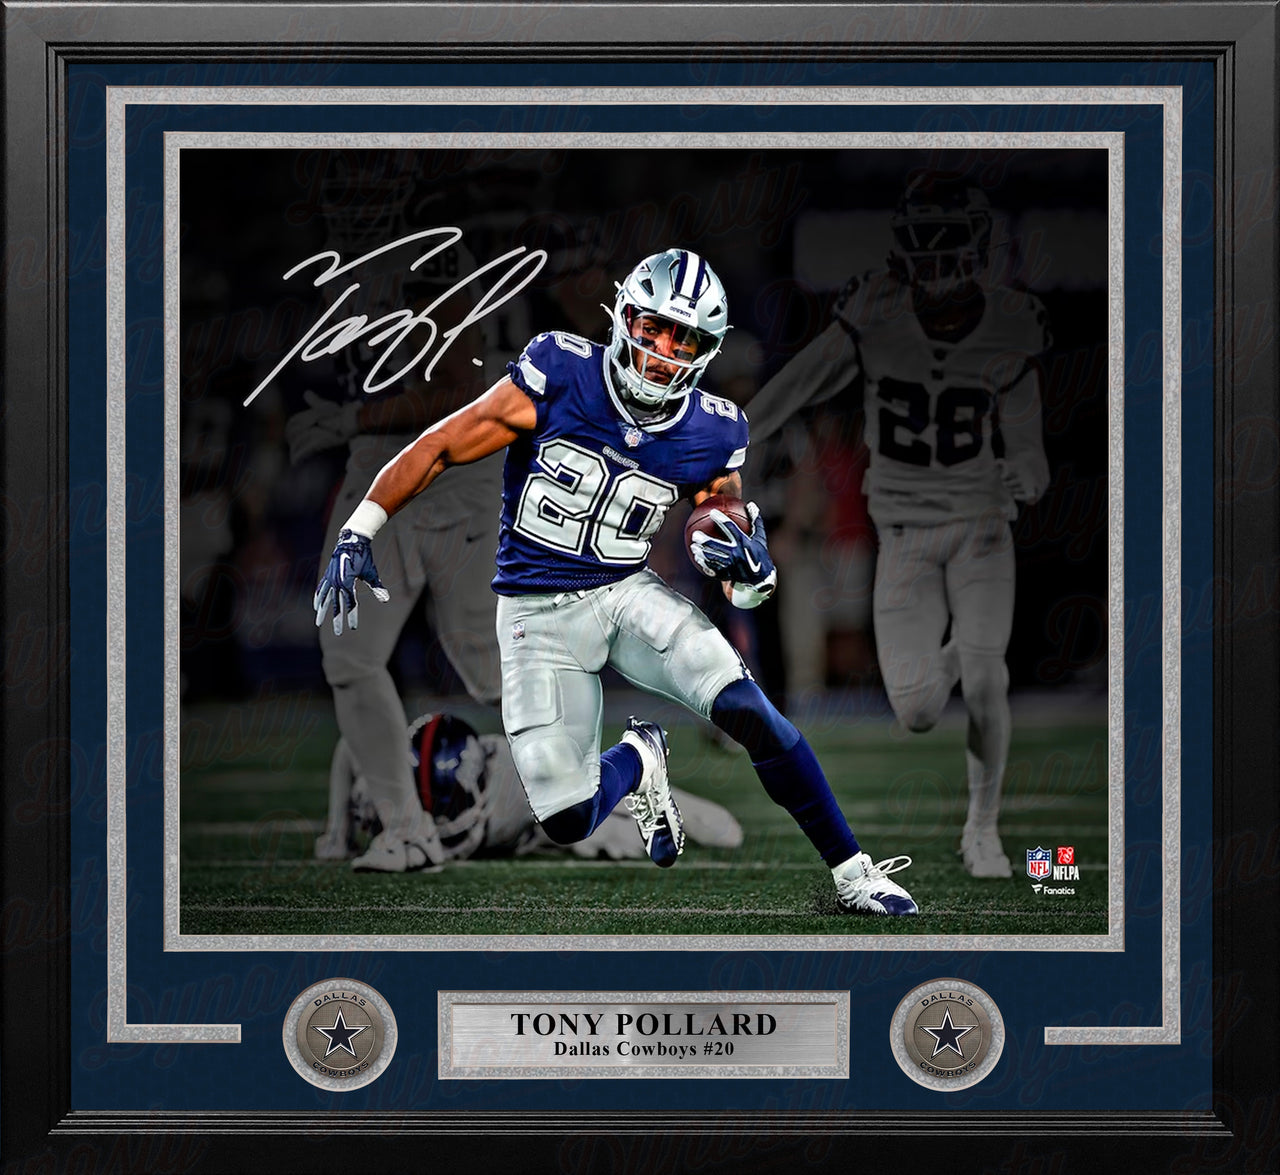 Tony Pollard Blackout Dallas Cowboys Autographed 11" x 14" Framed Football Photo Numbered to 120